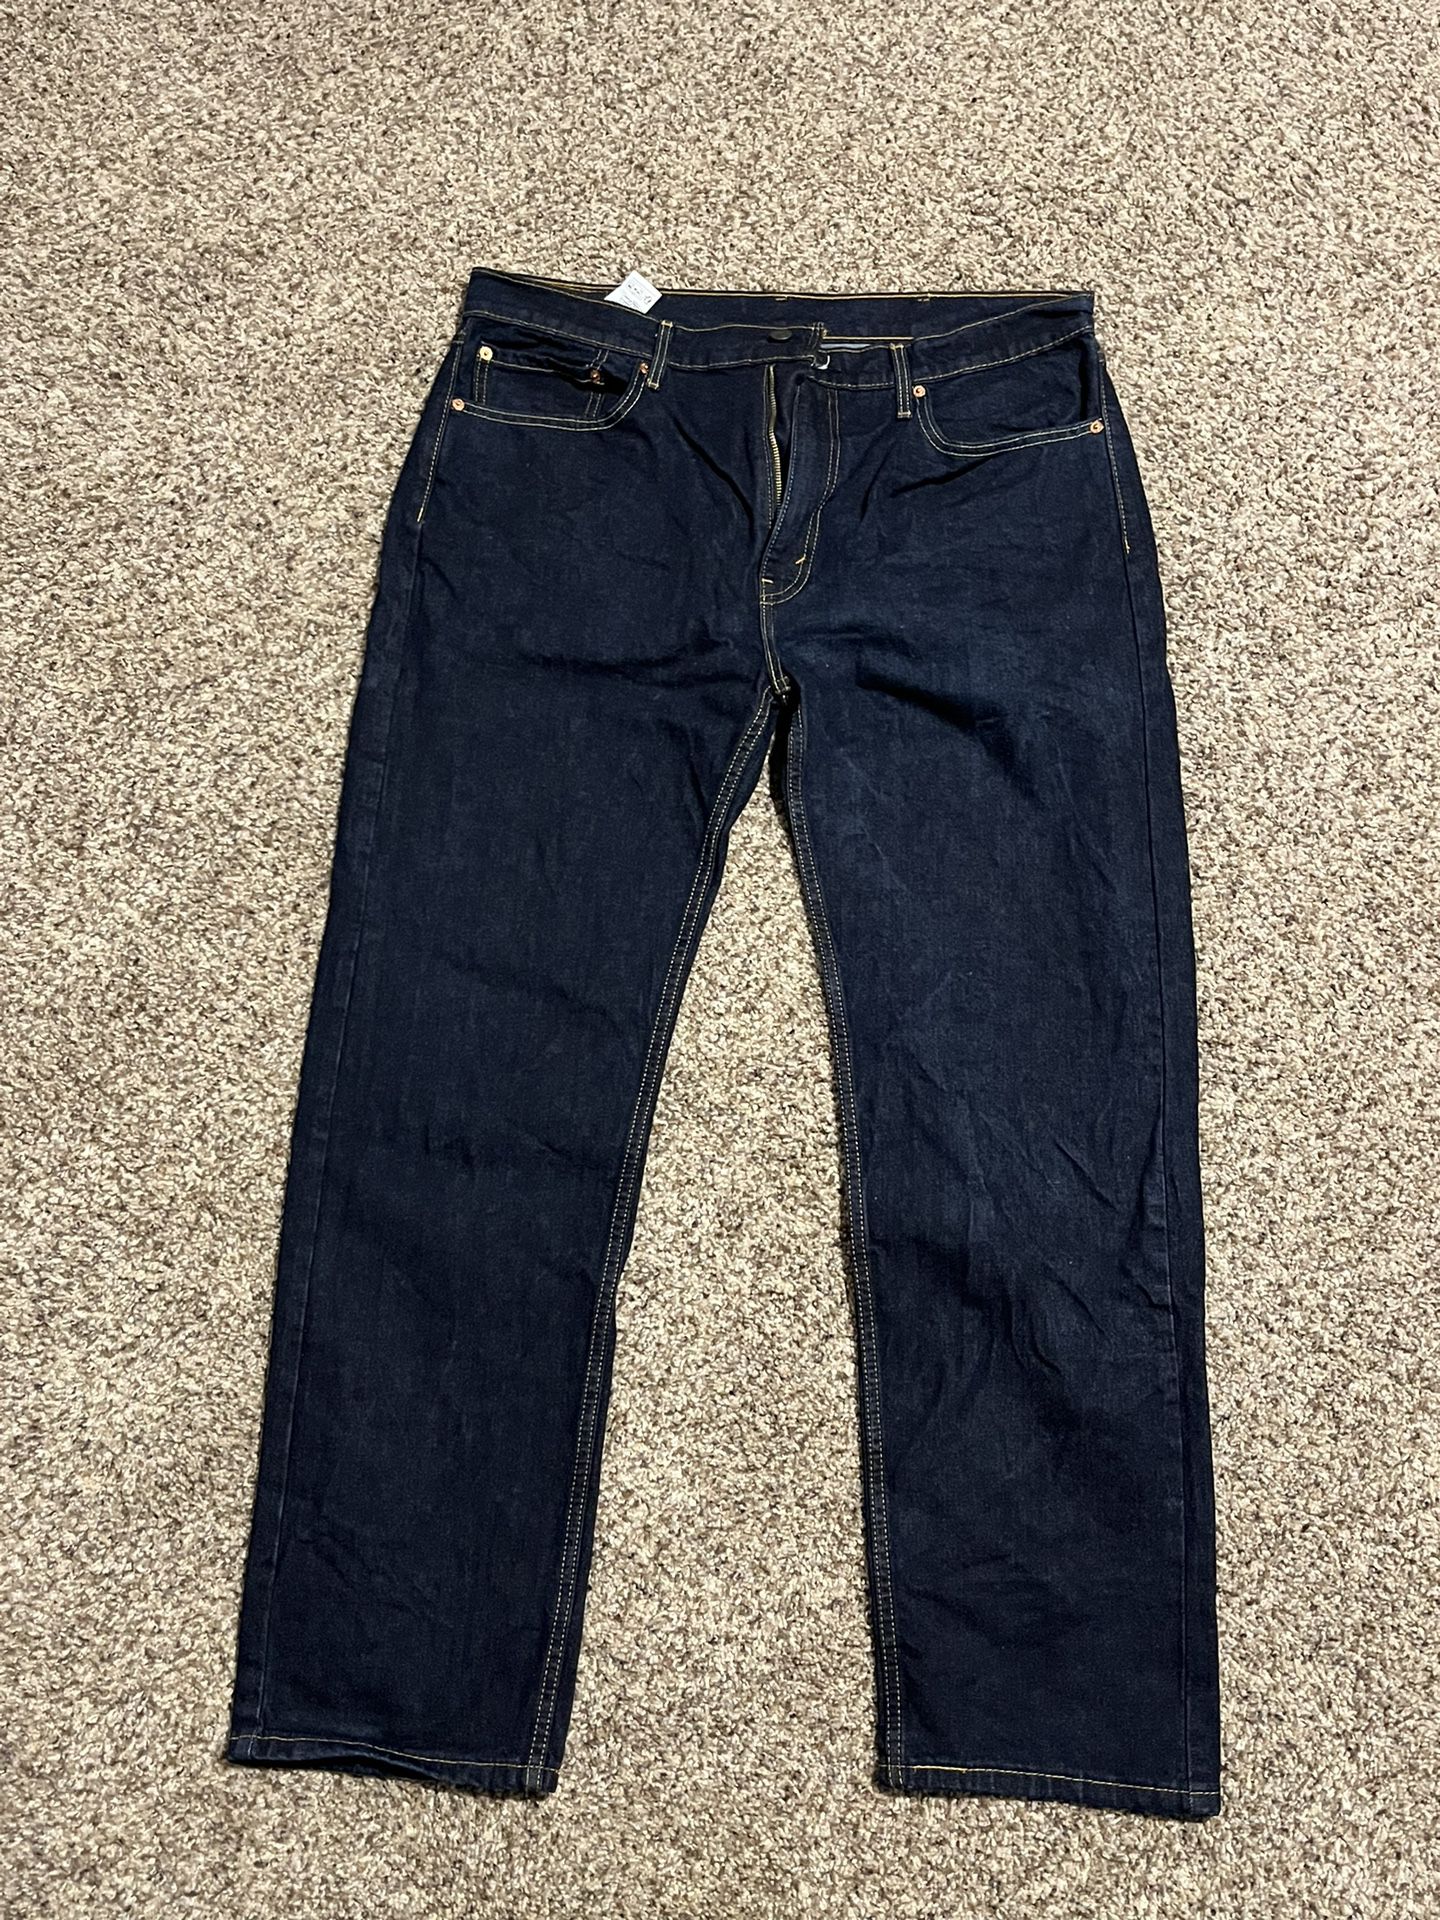 Levi’s 505 Size 38 By 32